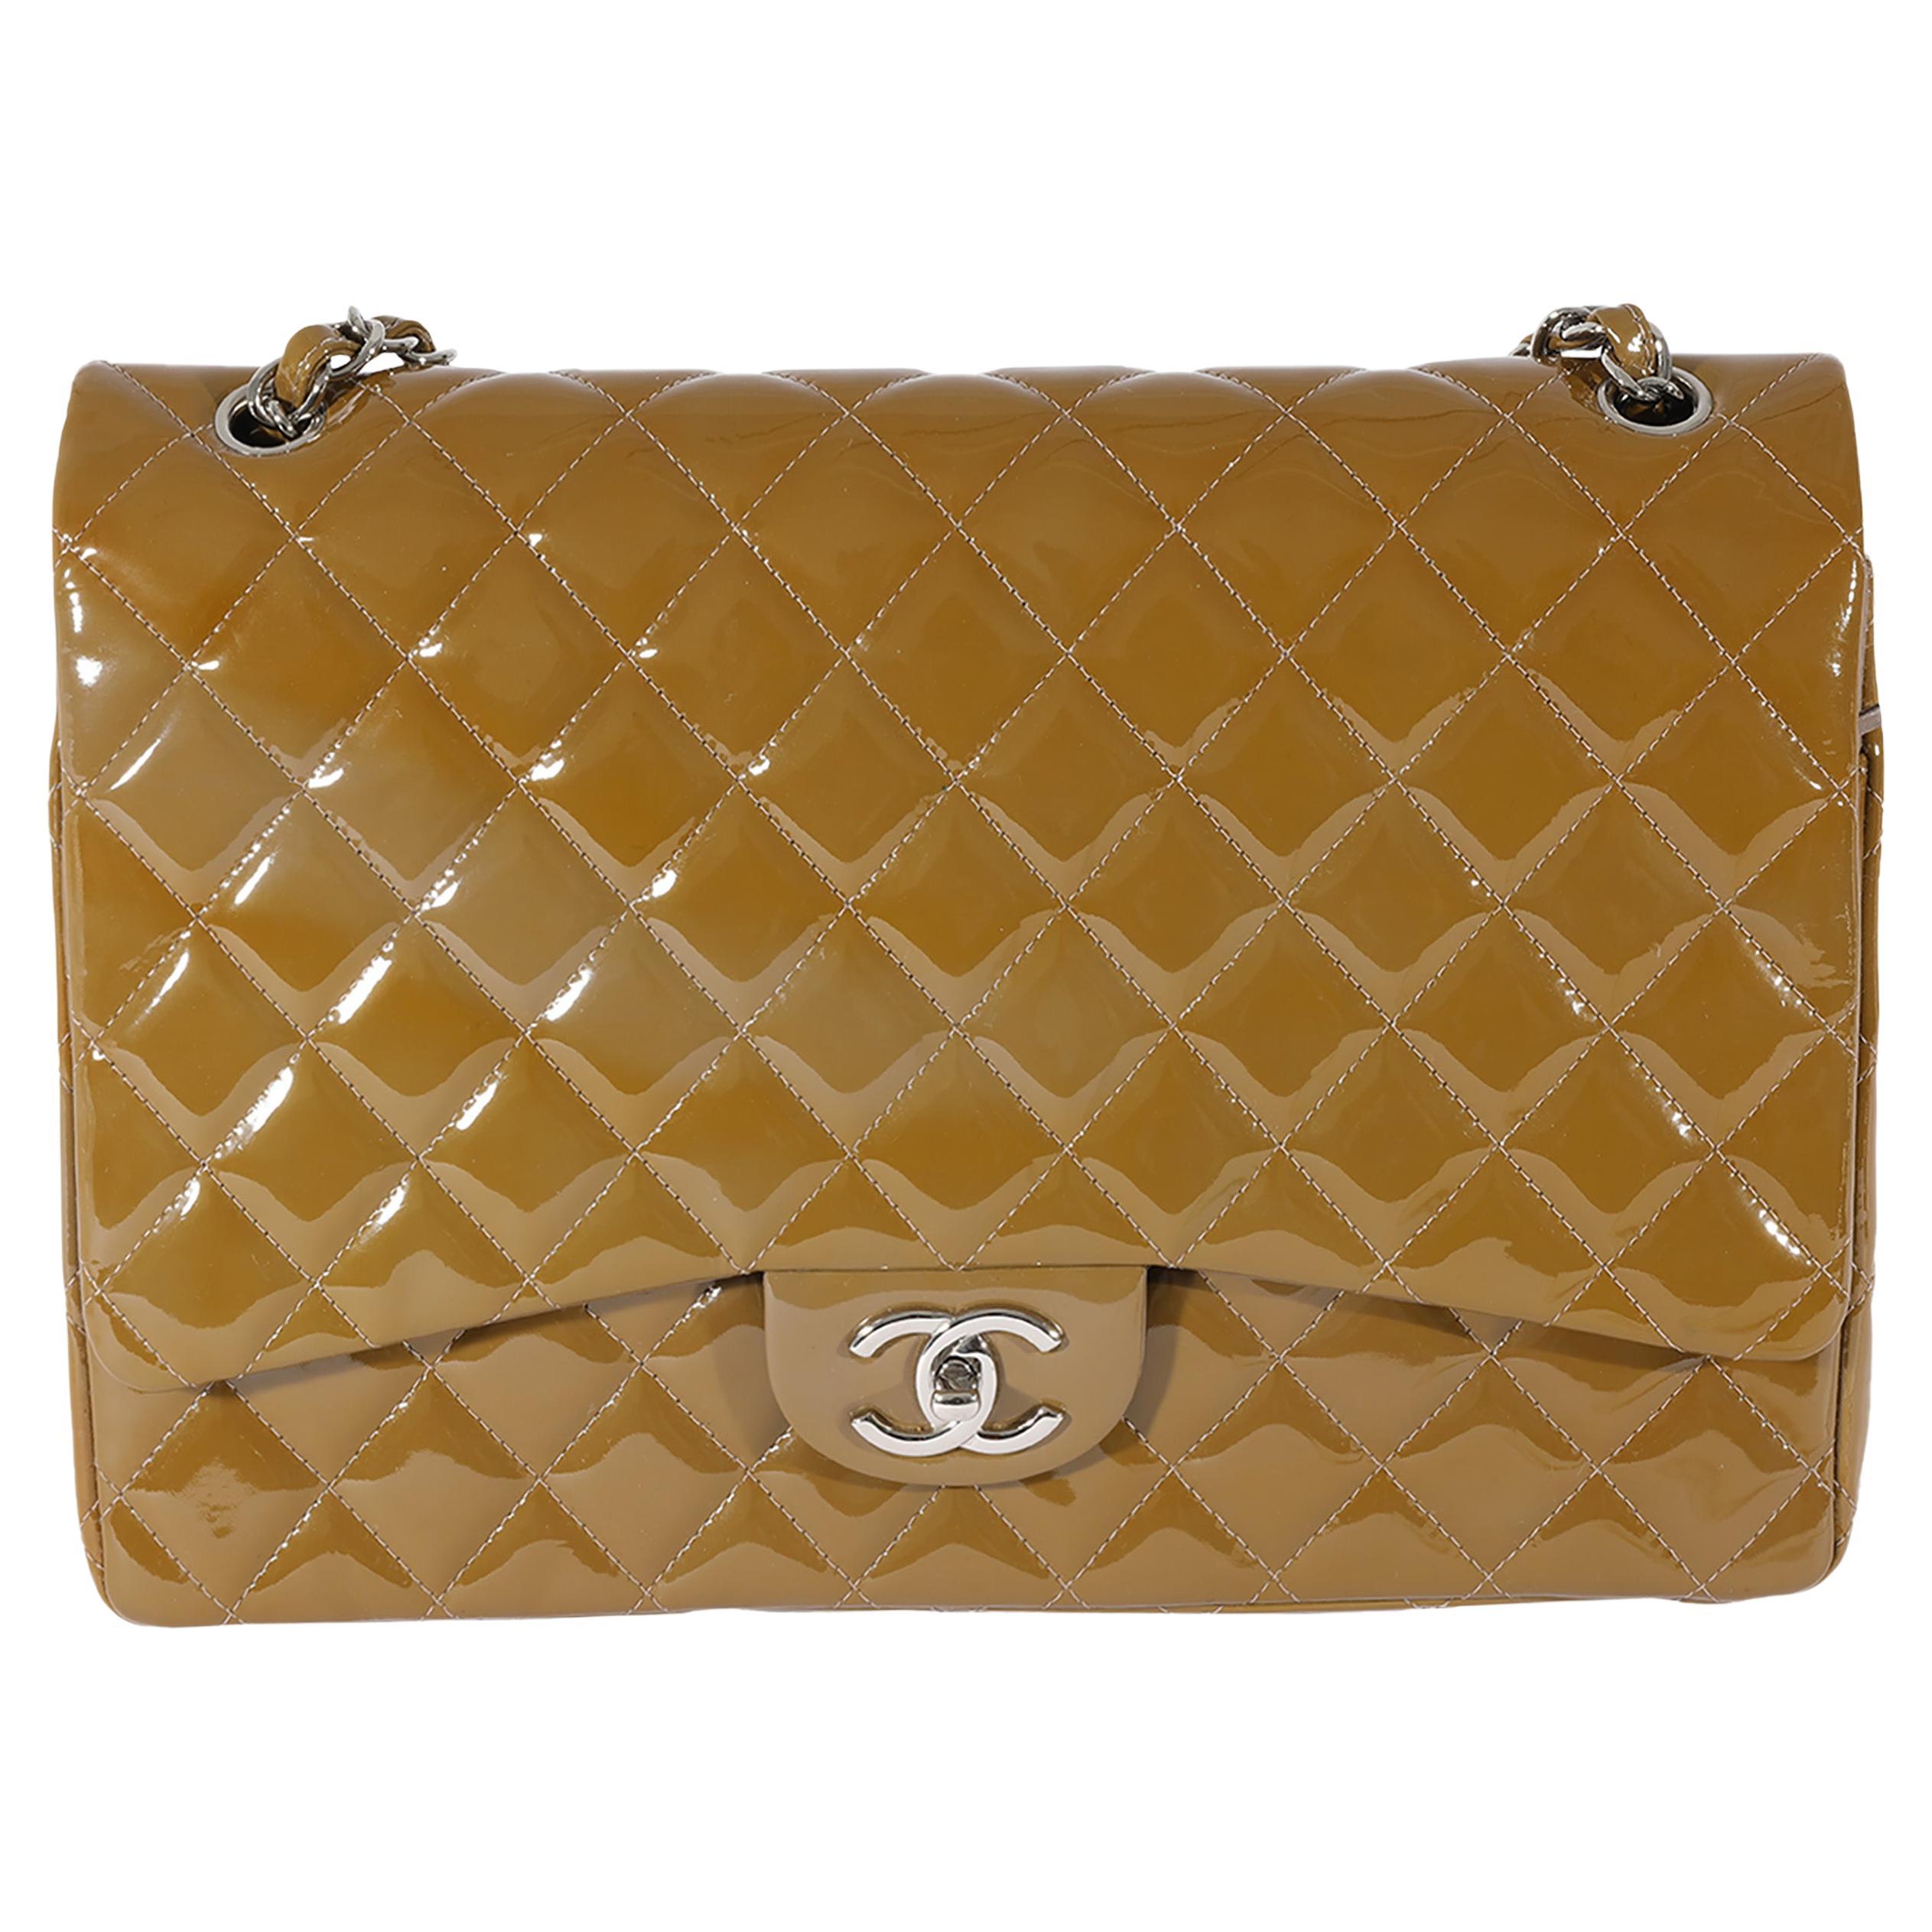 Chanel Tan Quilted Patent Leather Maxi Double Flap